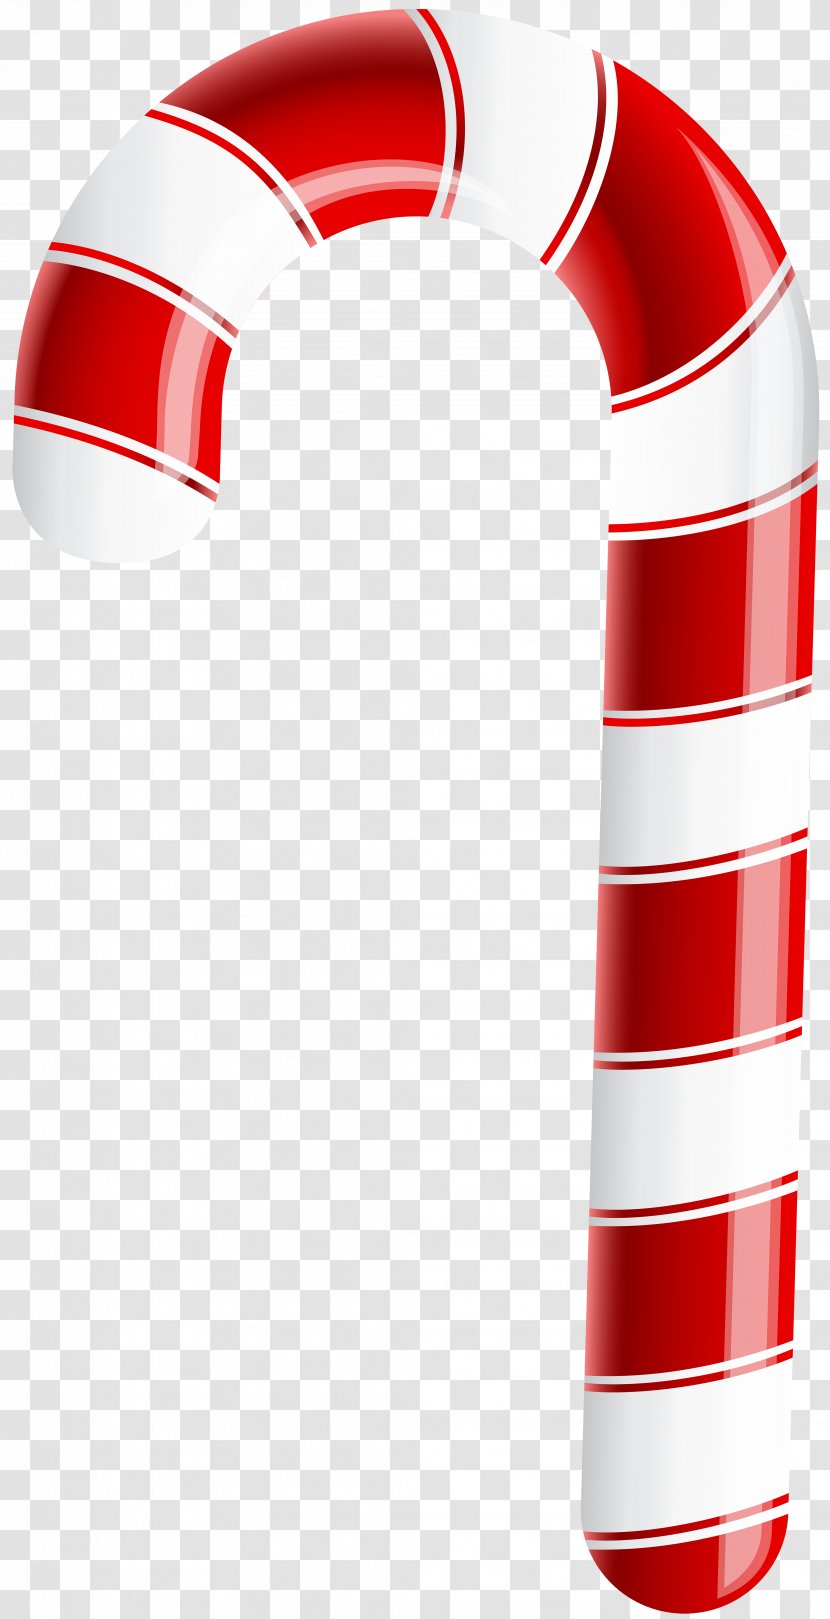 Candy Cane Clip Art Openclipart Transparent PNG